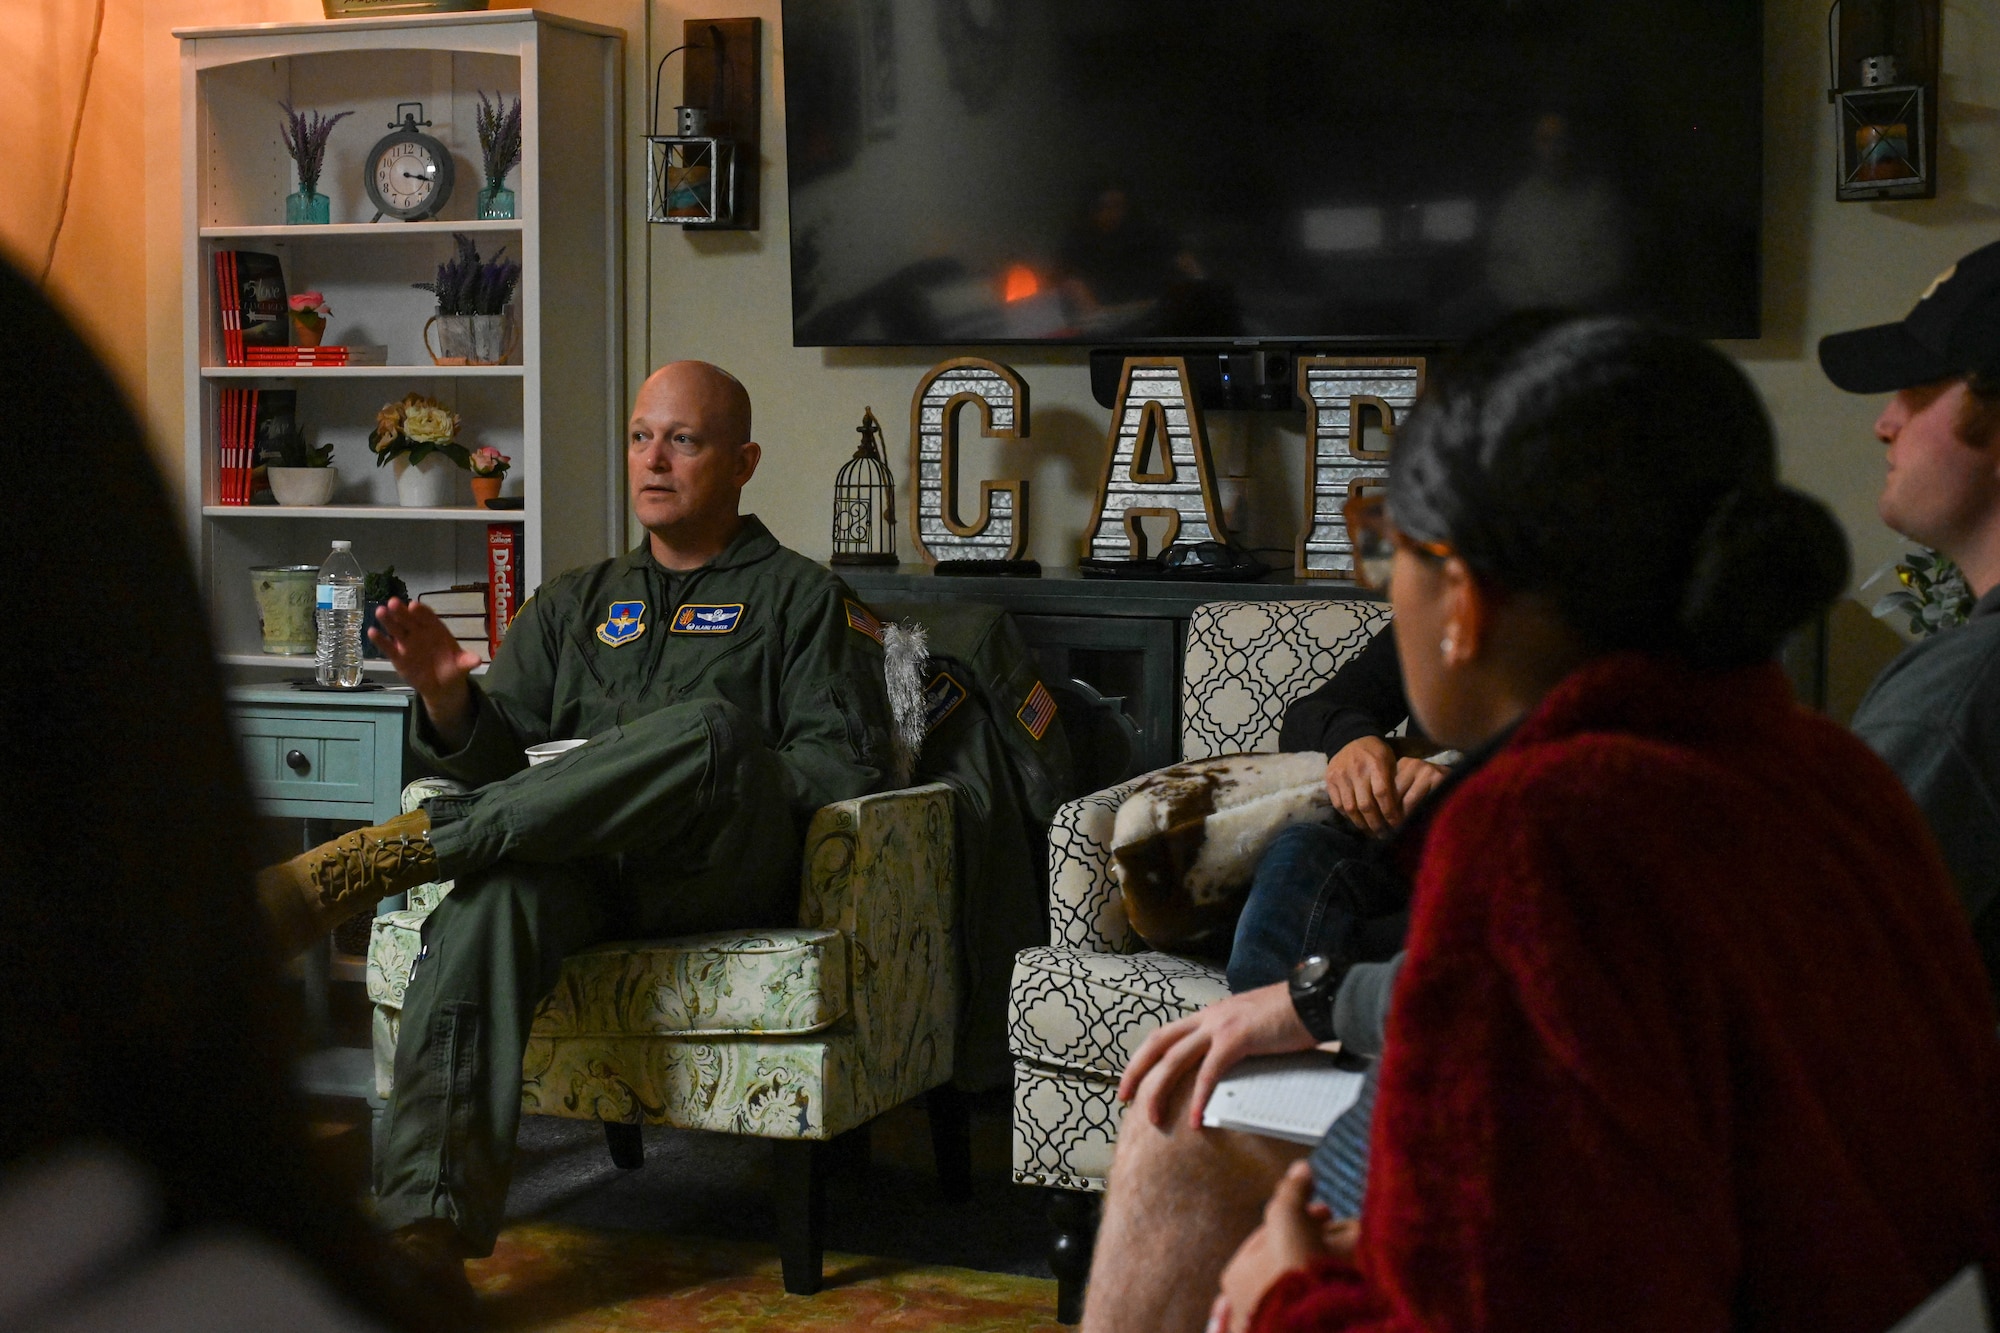 Col. Blaine Baker, 97th Air Mobility Wing commander, shares stories and lessons with Airmen during a coping skills class at Altus Air Force Base, Oklahoma, Dec. 12, 2022. A part of the class is titled “Lowering your Shield” which includes higher ranking members from across the base giving insight to junior Airmen. (U.S. Air Force photo by Senior Airman Trenton Jancze)